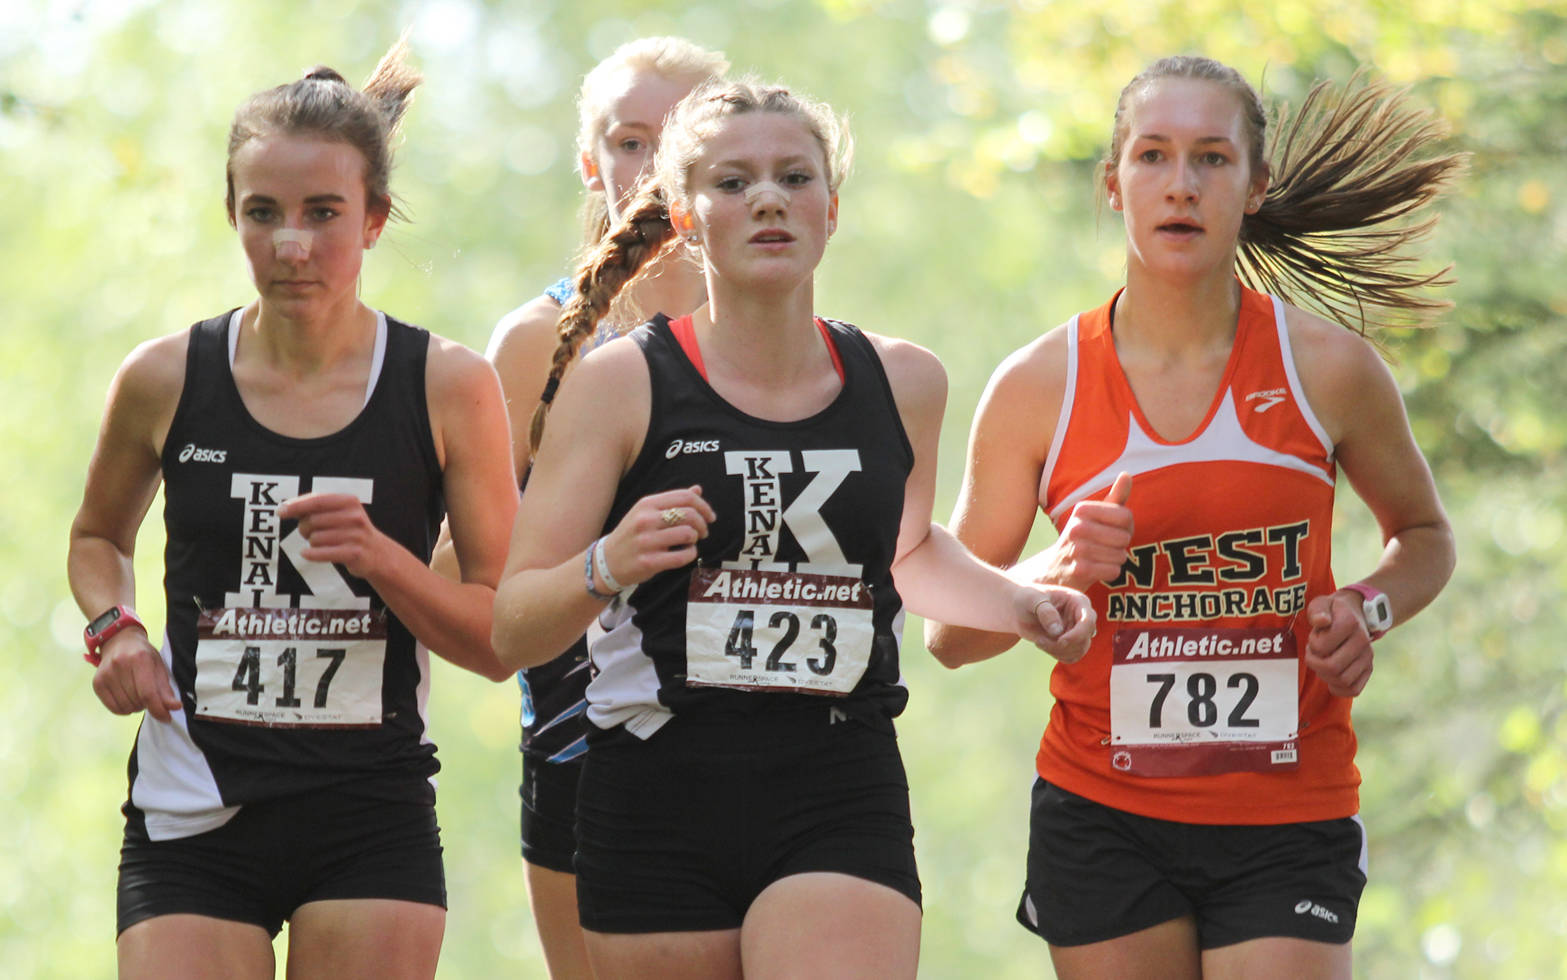 Kenai Central’s Riana Boonstra and Addison Gibson keep pace with West Anchorage’s Victoria Mayer during the second lap of the five-kilometer girls varsity race of the Palmer Invitational Saturday, Sept. 2, 2017, on the Michael Janecek Trails at Palmer High School. Gibson edged Boonstra at the finish line, and the Kardinals placed fifth and sixth in the field. (Photo by Jeremiah Bartz/Frontiersman)